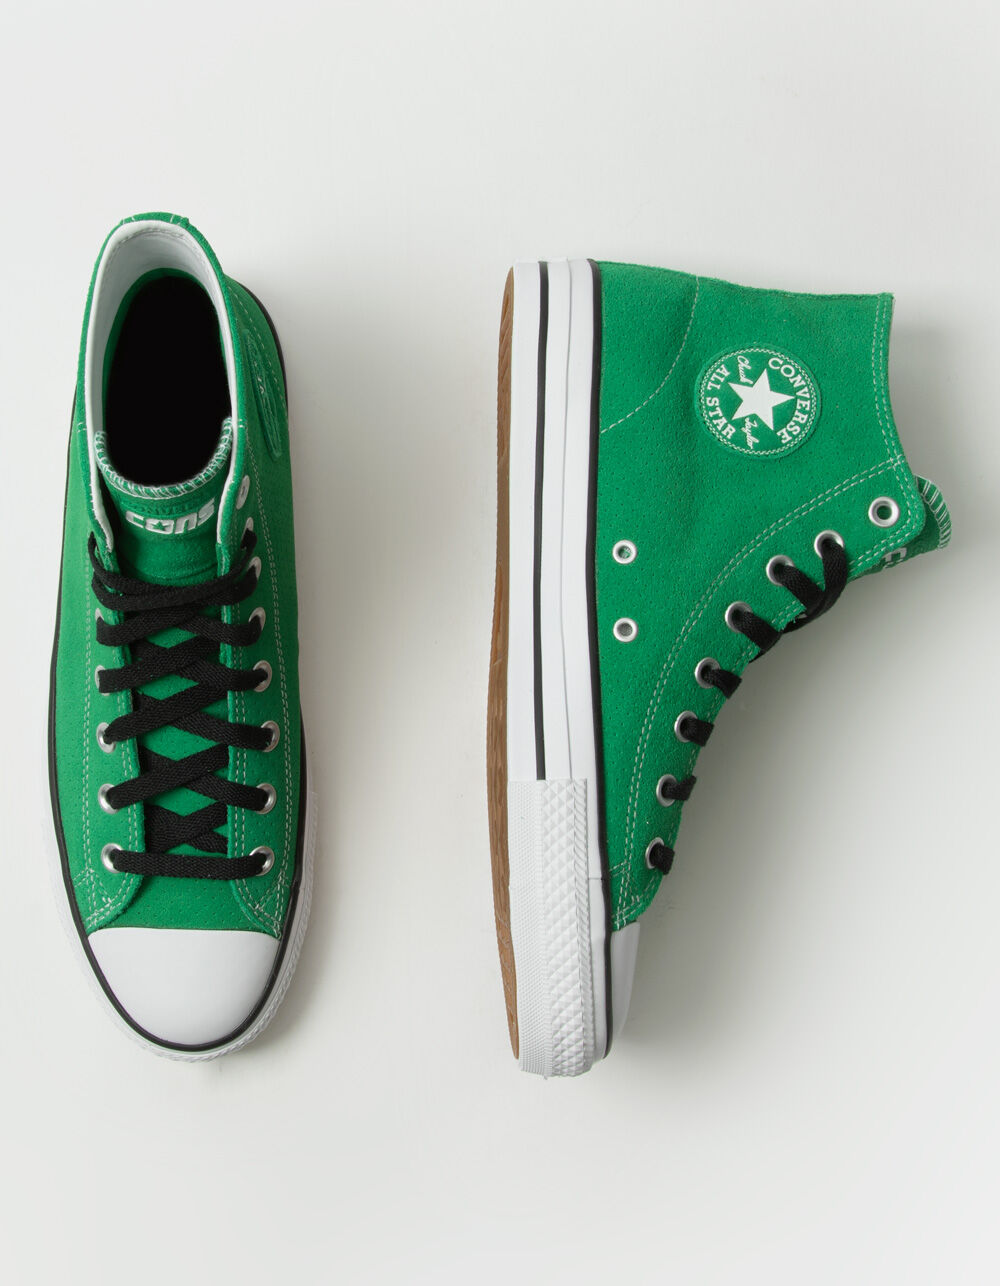 CONVERSE Cons Perforated Suede Chuck Taylor All Star Pro High Top Shoes ...